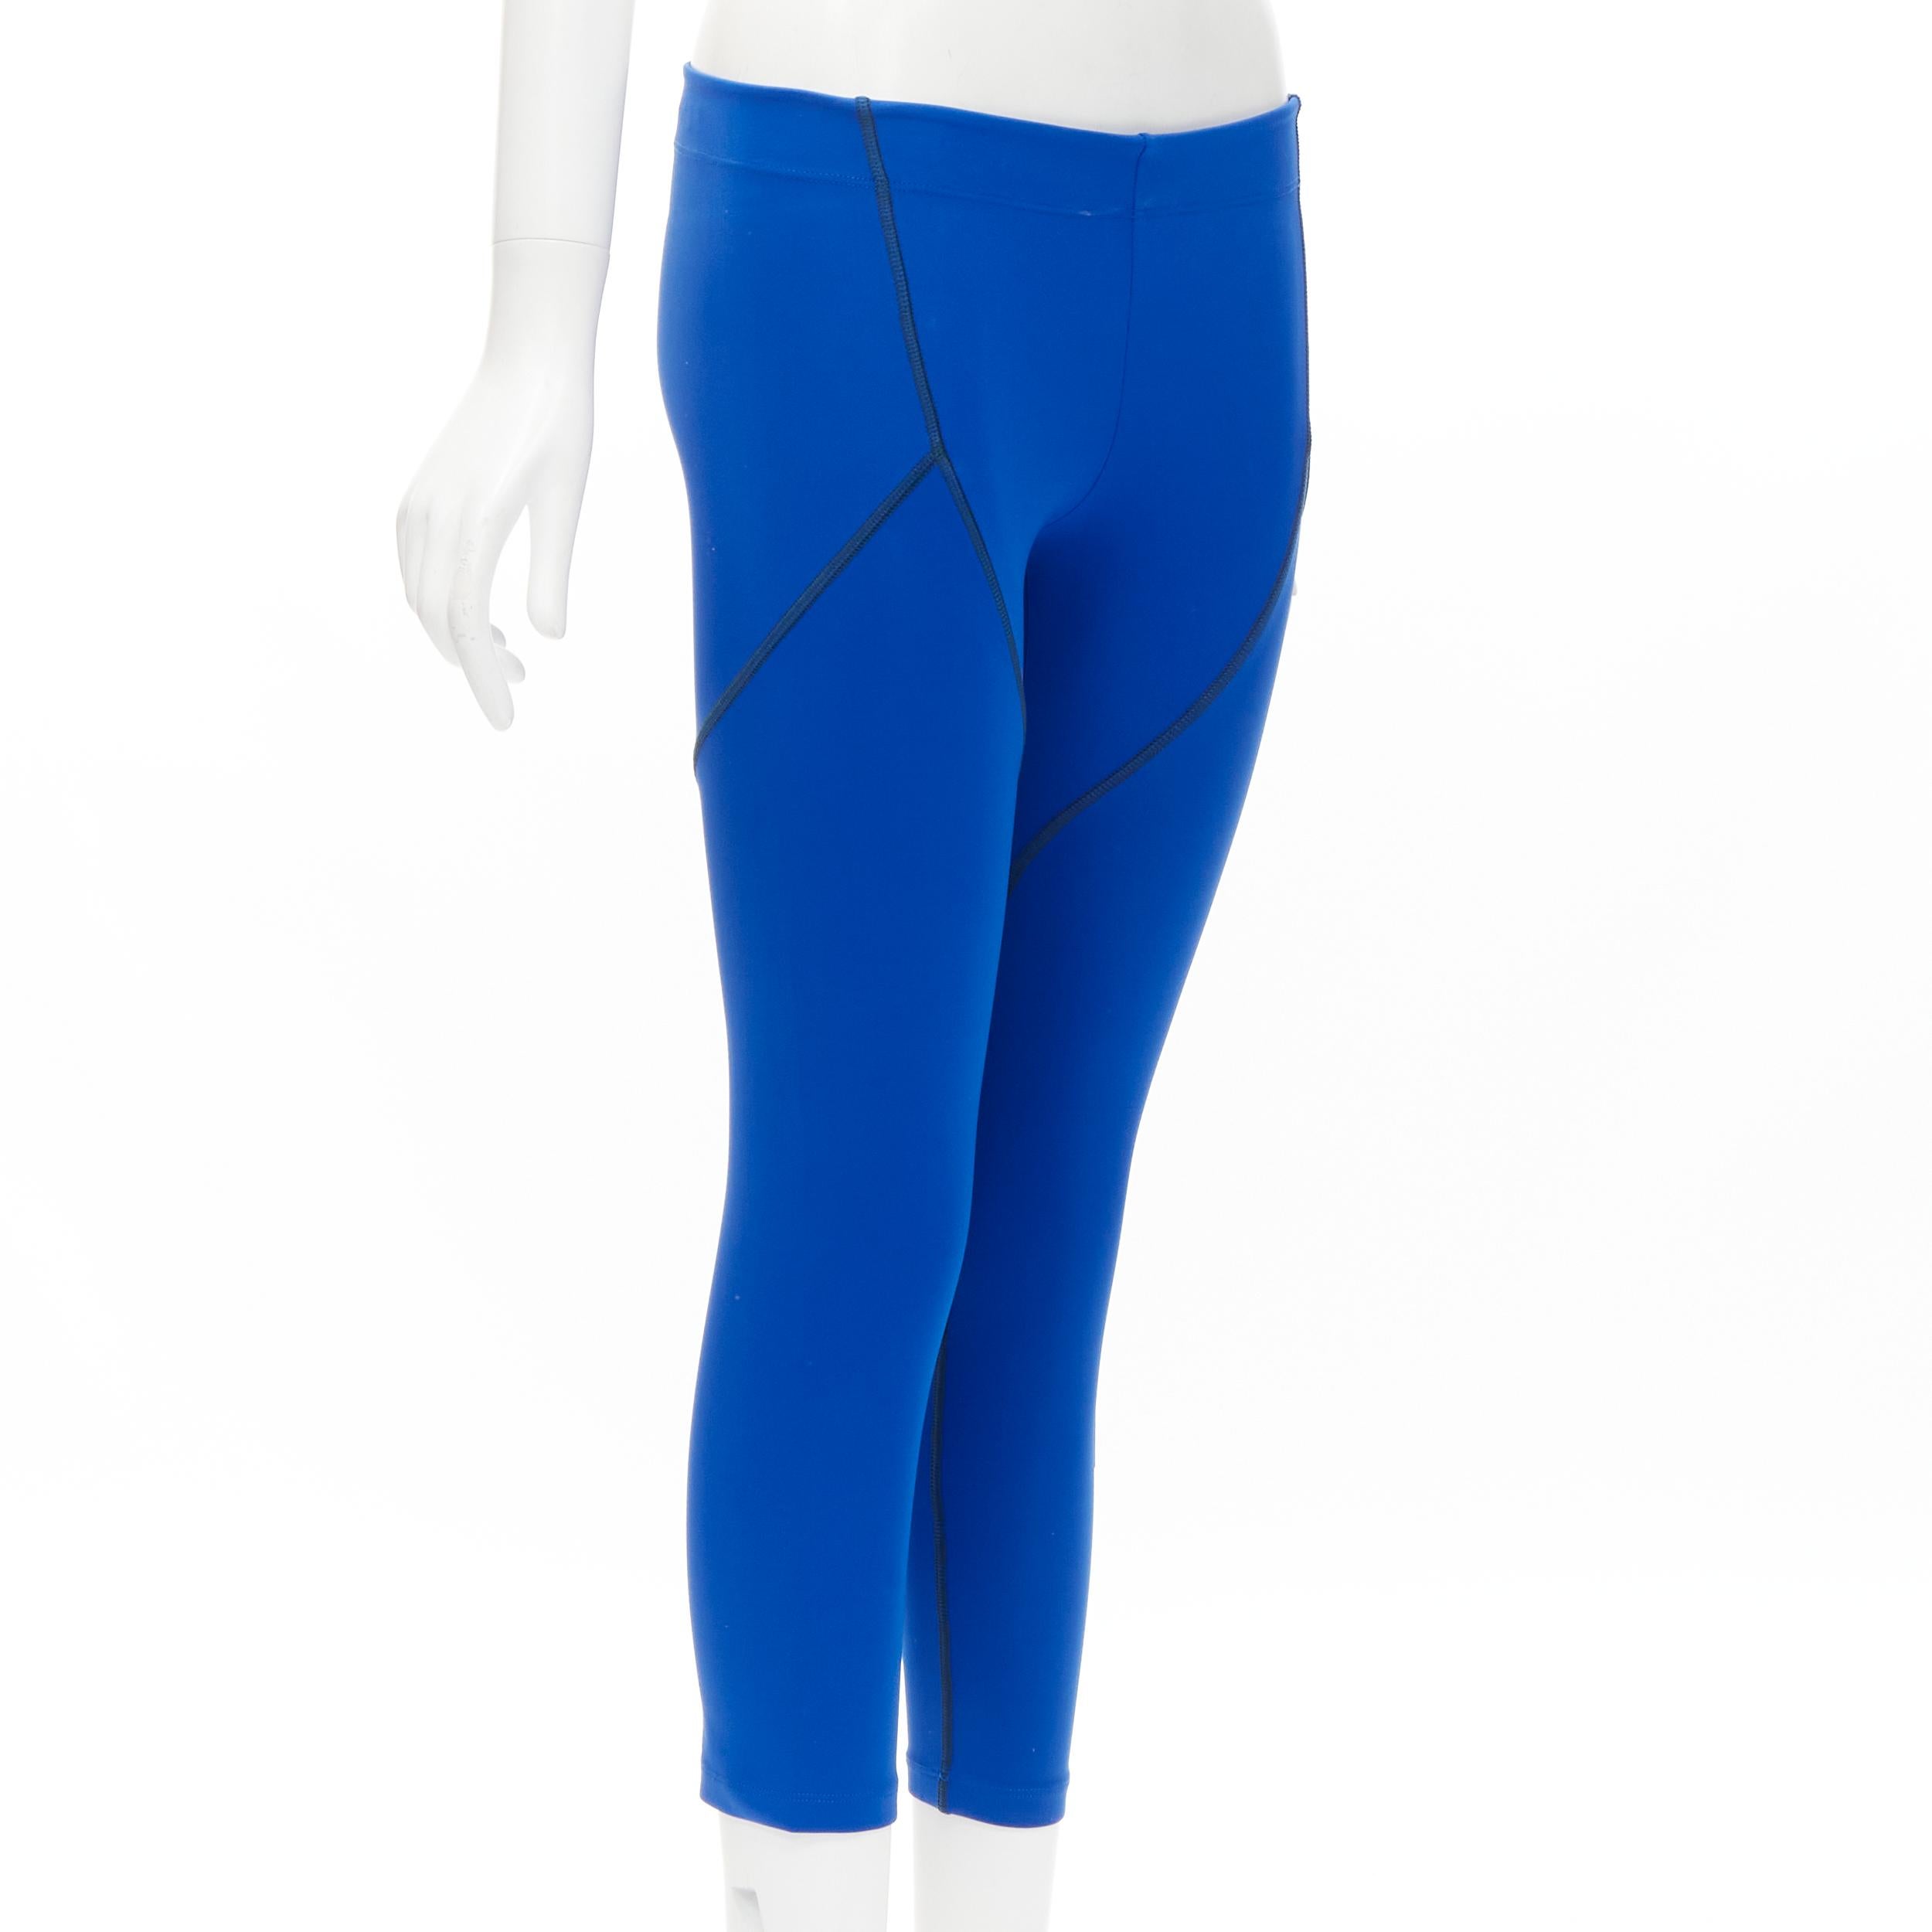 FENDI Activewear reflective silver logo cobalt blue sports leggings XS
Brand: Fendi
Material: Feels like polyester
Color: Blue
Pattern: Solid
Extra Detail: Silver Fendi Roma printed on left leg

CONDITION:
Condition: Excellent, this item was